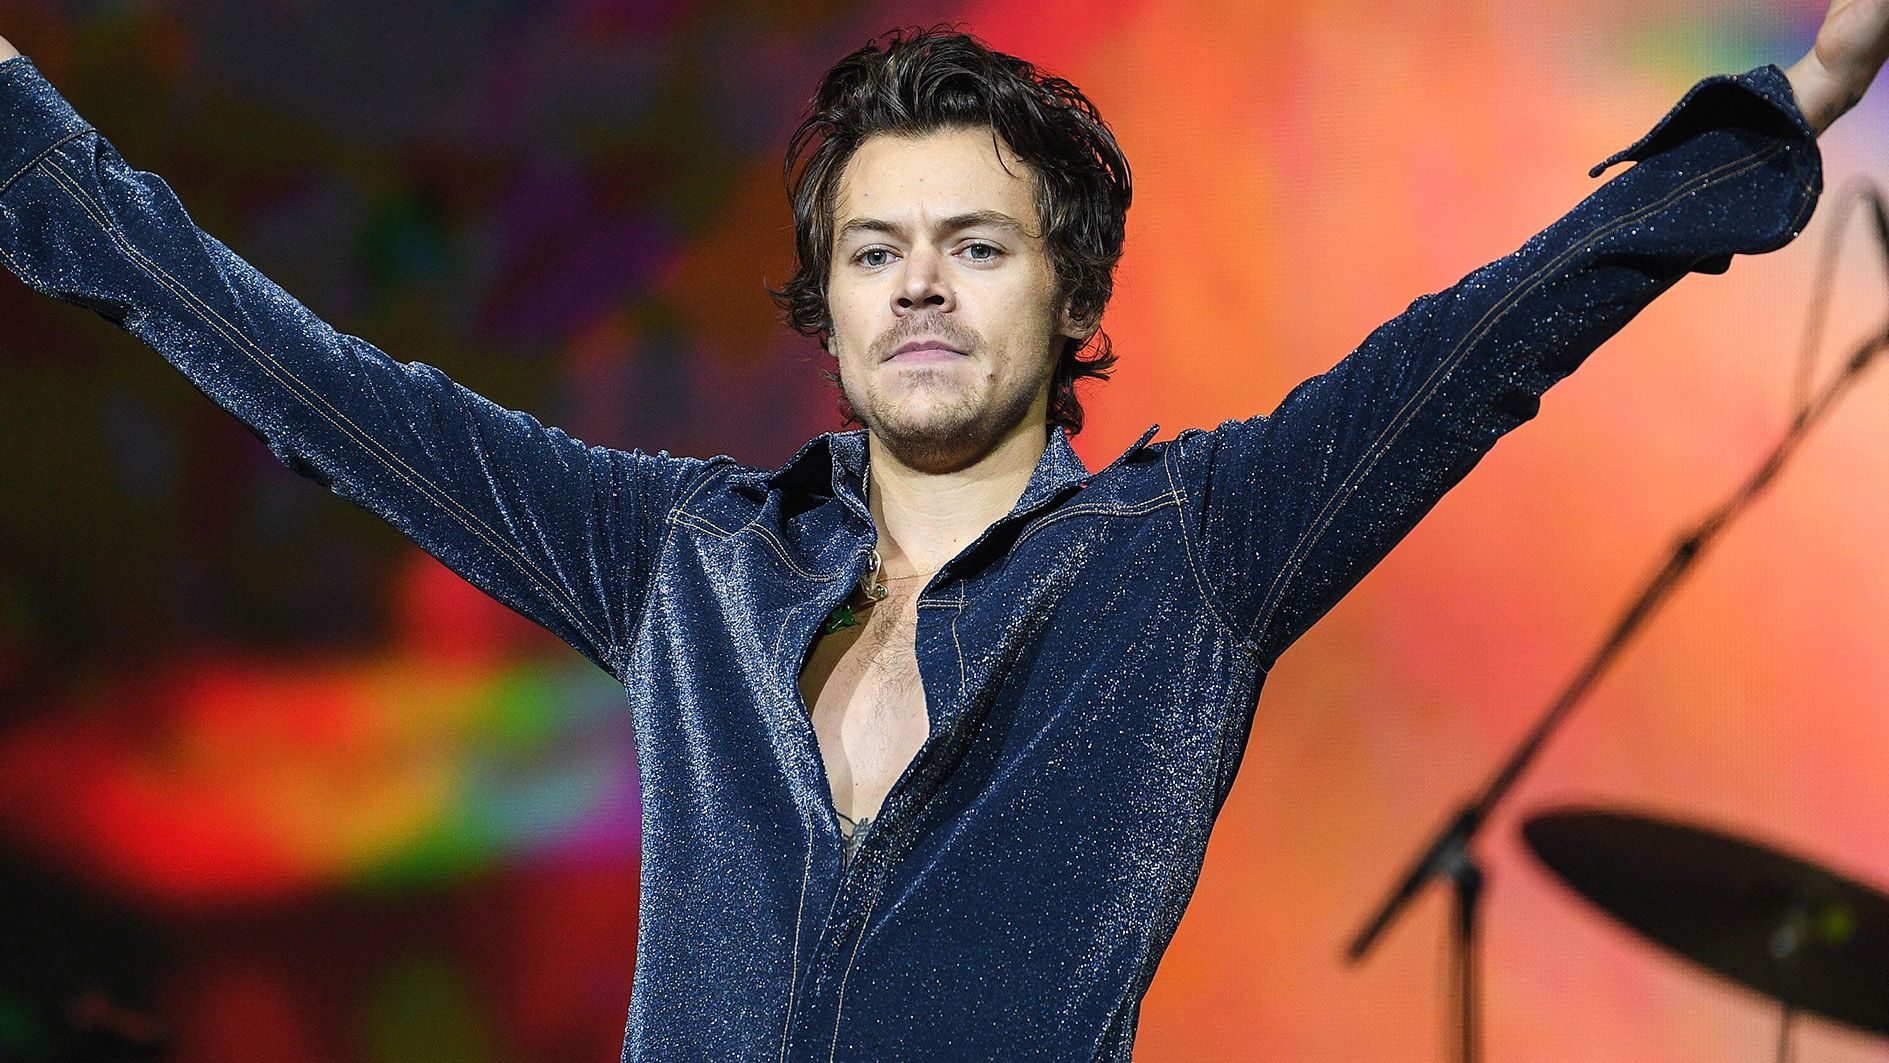 Harry Styles Tickets - Harry Styles Concert Tickets and Tour Dates